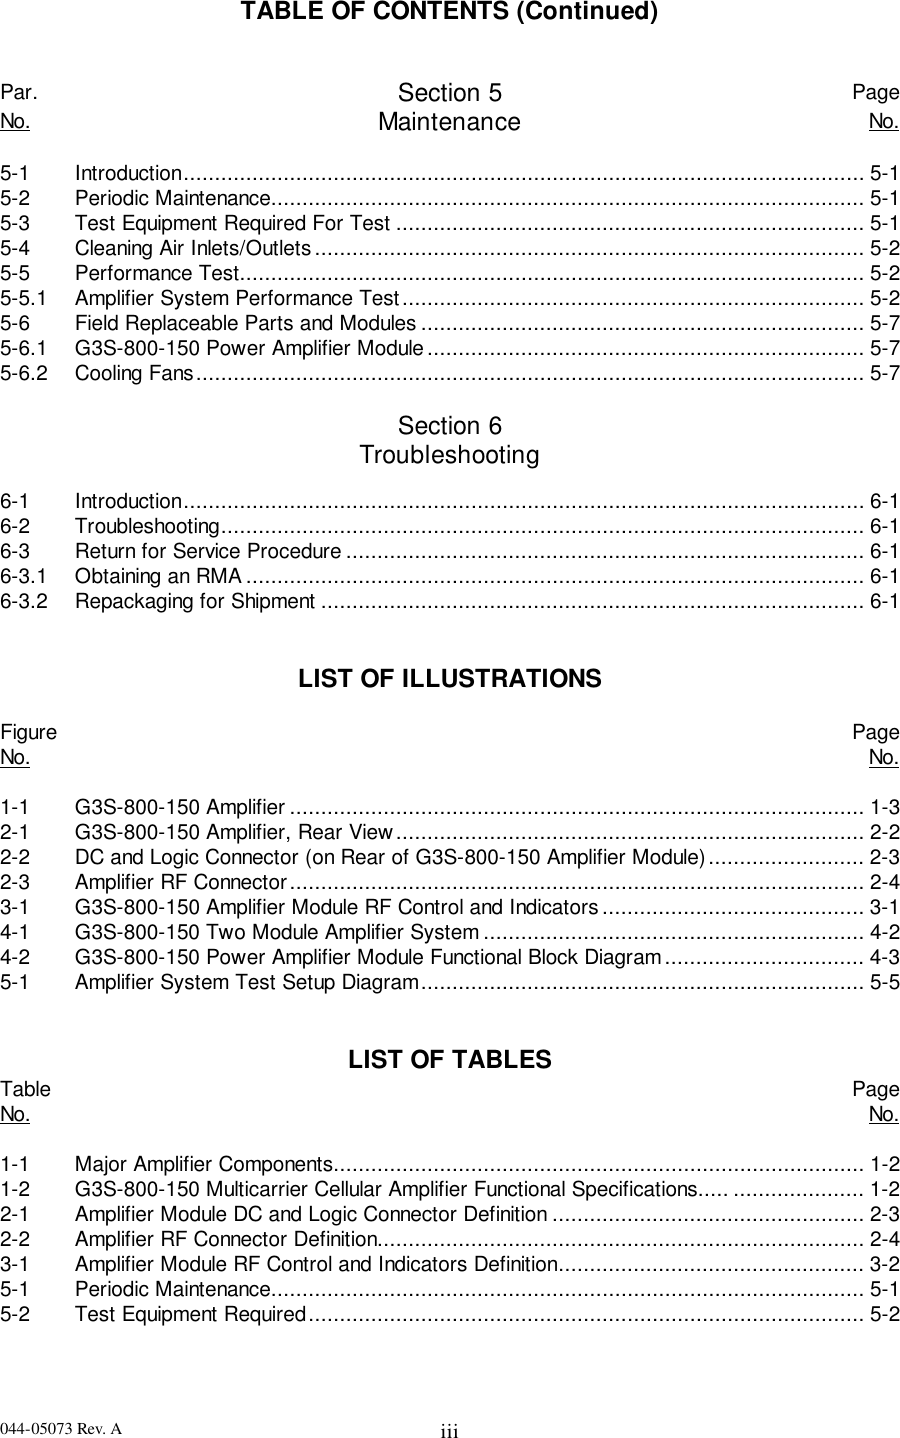 044-05073 Rev. A iiiTABLE OF CONTENTS (Continued)Par. Section 5 PageNo. Maintenance No.5-1 Introduction............................................................................................................. 5-15-2 Periodic Maintenance............................................................................................... 5-15-3 Test Equipment Required For Test ........................................................................... 5-15-4 Cleaning Air Inlets/Outlets........................................................................................ 5-25-5 Performance Test.................................................................................................... 5-25-5.1 Amplifier System Performance Test.......................................................................... 5-25-6 Field Replaceable Parts and Modules ....................................................................... 5-75-6.1 G3S-800-150 Power Amplifier Module...................................................................... 5-75-6.2 Cooling Fans........................................................................................................... 5-7Section 6Troubleshooting6-1 Introduction............................................................................................................. 6-16-2 Troubleshooting....................................................................................................... 6-16-3 Return for Service Procedure ................................................................................... 6-16-3.1 Obtaining an RMA................................................................................................... 6-16-3.2 Repackaging for Shipment ....................................................................................... 6-1LIST OF ILLUSTRATIONSFigure PageNo. No.1-1 G3S-800-150 Amplifier ............................................................................................ 1-32-1 G3S-800-150 Amplifier, Rear View........................................................................... 2-22-2 DC and Logic Connector (on Rear of G3S-800-150 Amplifier Module)......................... 2-32-3 Amplifier RF Connector............................................................................................ 2-43-1 G3S-800-150 Amplifier Module RF Control and Indicators.......................................... 3-14-1 G3S-800-150 Two Module Amplifier System ............................................................. 4-24-2 G3S-800-150 Power Amplifier Module Functional Block Diagram................................ 4-35-1 Amplifier System Test Setup Diagram....................................................................... 5-5LIST OF TABLESTable PageNo. No.1-1 Major Amplifier Components..................................................................................... 1-21-2 G3S-800-150 Multicarrier Cellular Amplifier Functional Specifications..... ..................... 1-22-1 Amplifier Module DC and Logic Connector Definition .................................................. 2-32-2 Amplifier RF Connector Definition.............................................................................. 2-43-1 Amplifier Module RF Control and Indicators Definition................................................. 3-25-1 Periodic Maintenance............................................................................................... 5-15-2 Test Equipment Required......................................................................................... 5-2